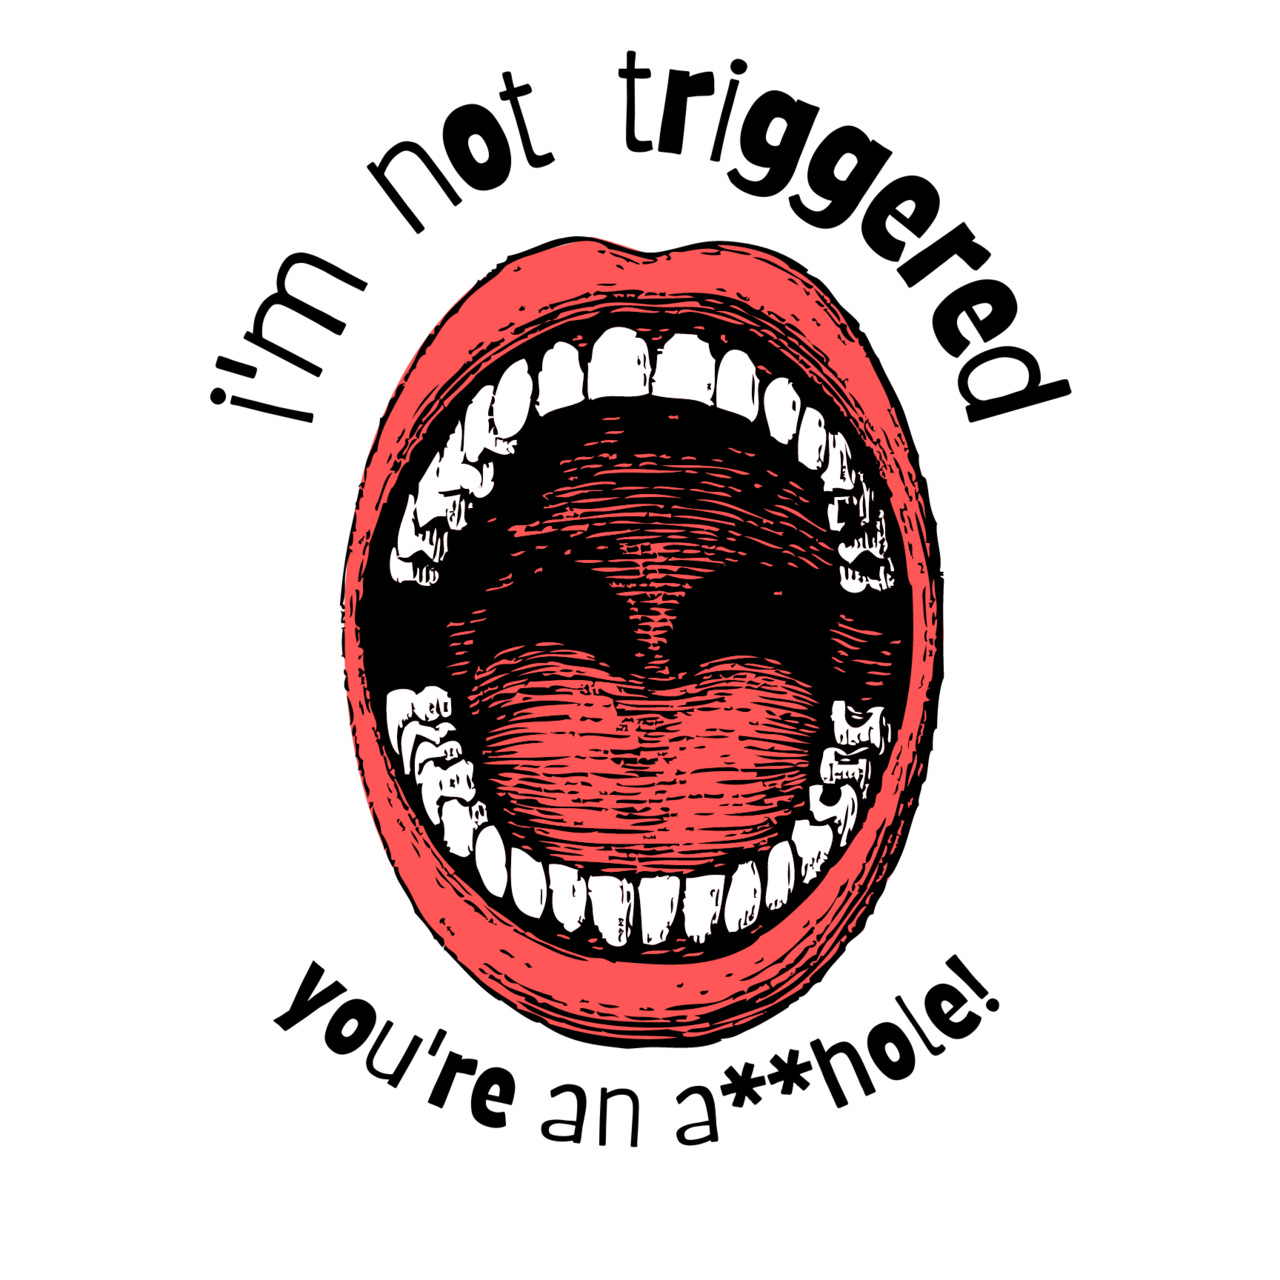 I’m Not Triggered, You’re an Asshole!